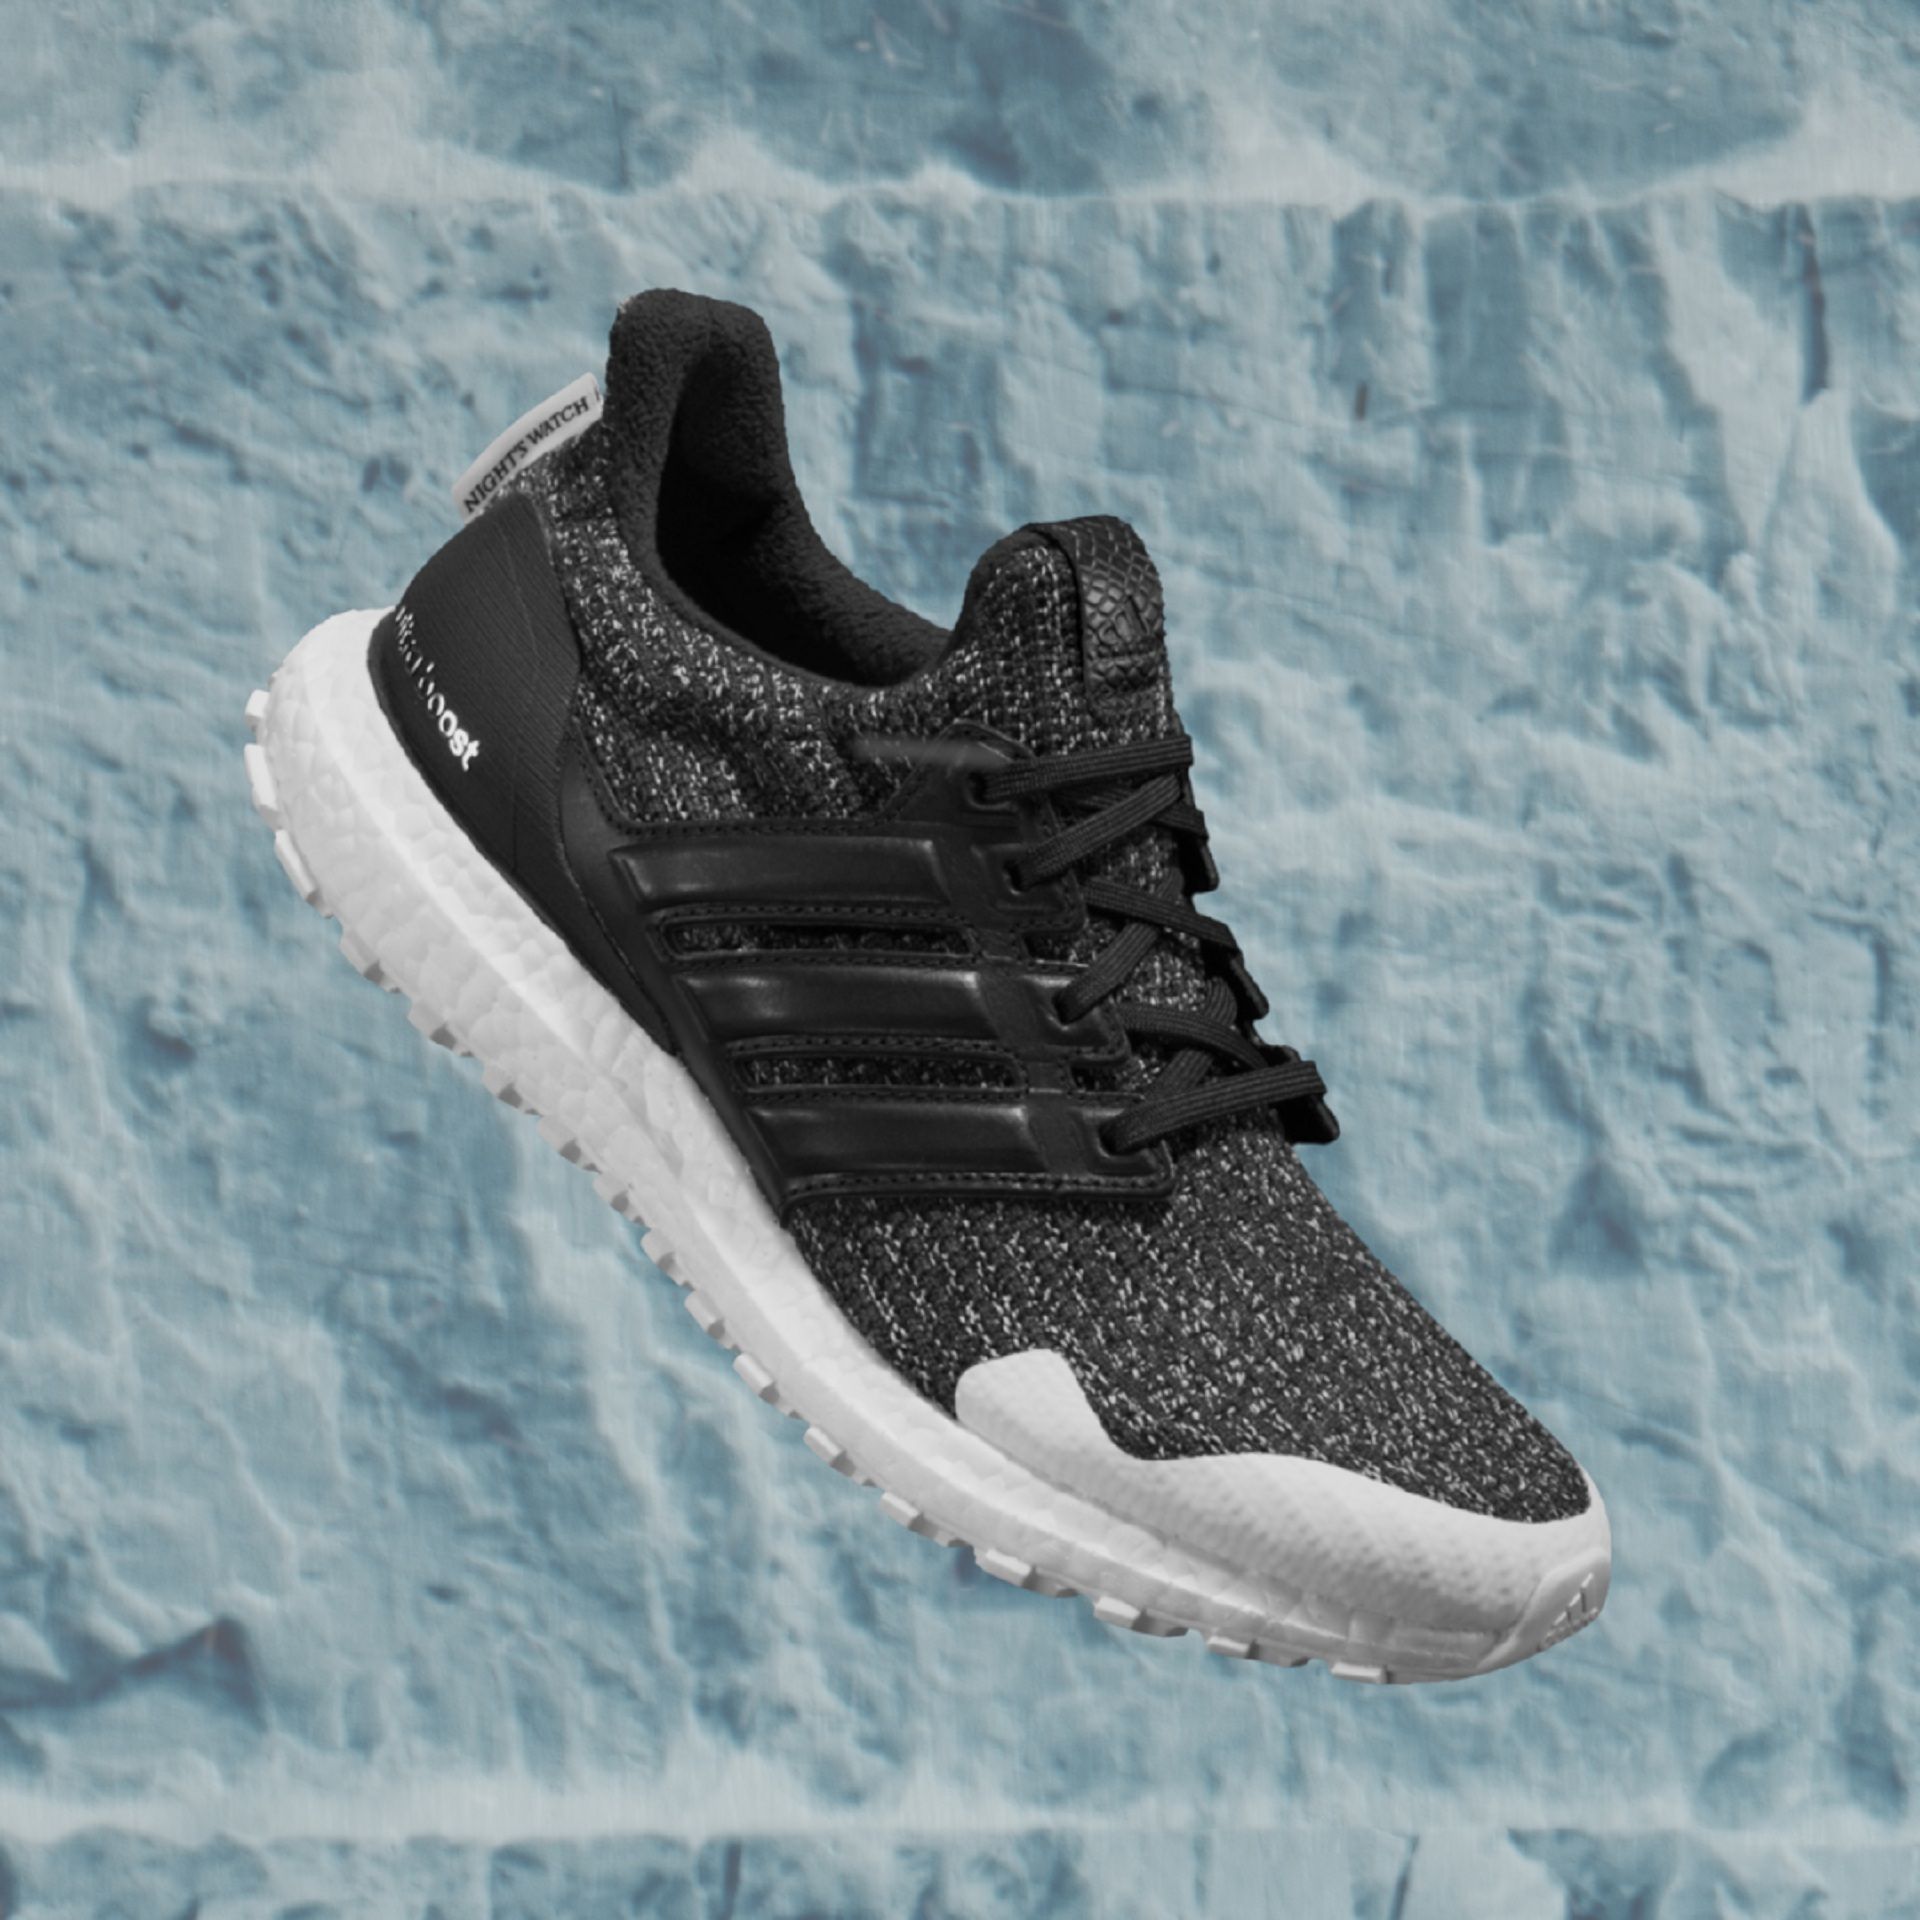 of Thrones' Adidas Ultra Boost Collection Finally Makes Its